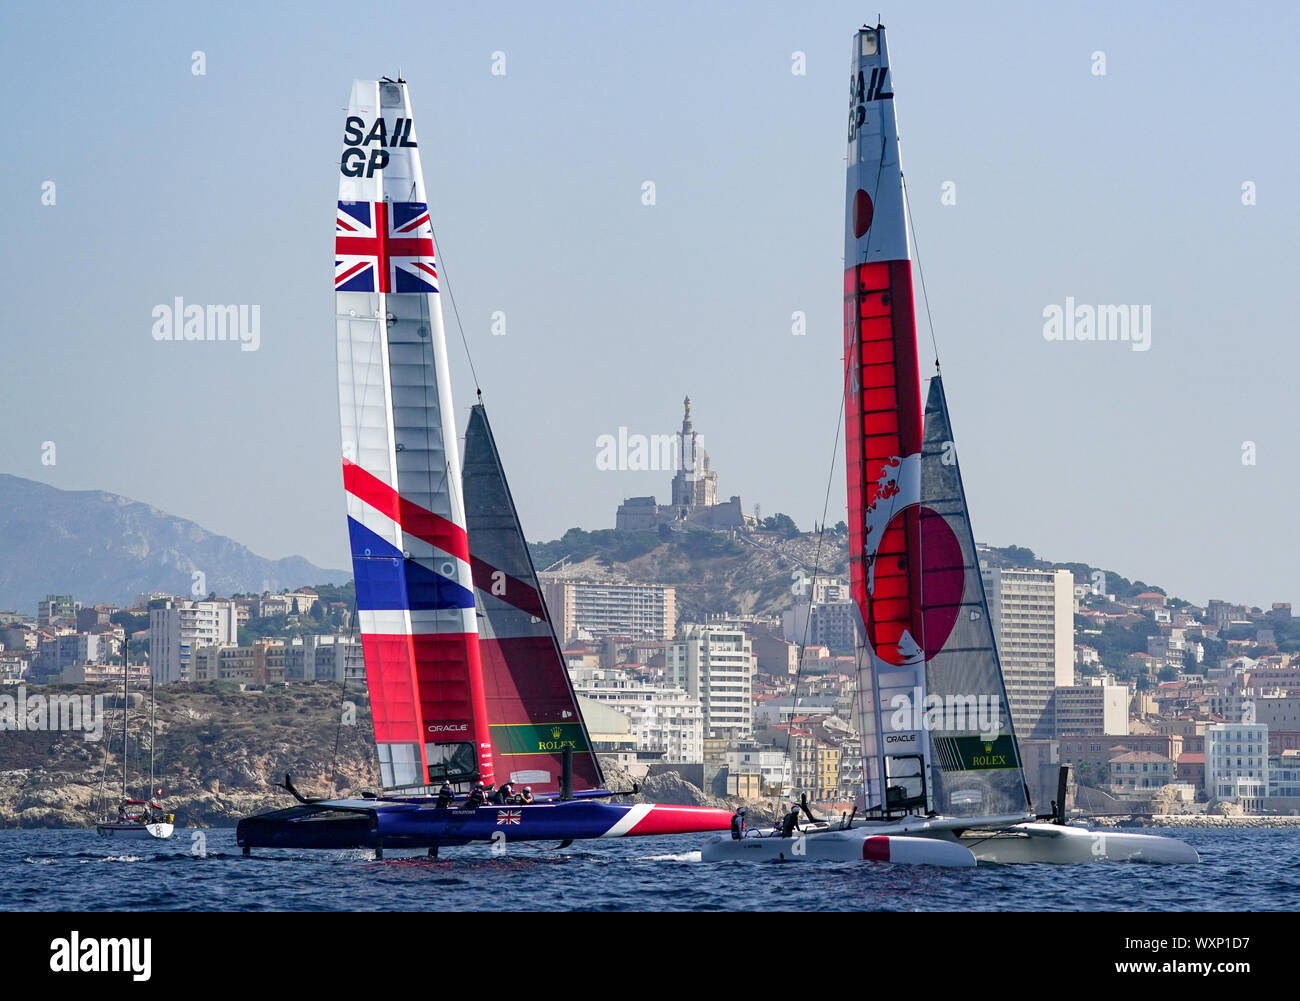 Great Britain SailGP Team helmed by Dylan Fletcher and Japan SailGP Team helmed by Nathan Outteridge in action on the Rade de Marseille as they practise for the final SailGP event of Season 1 in Marseille. Stock Photo